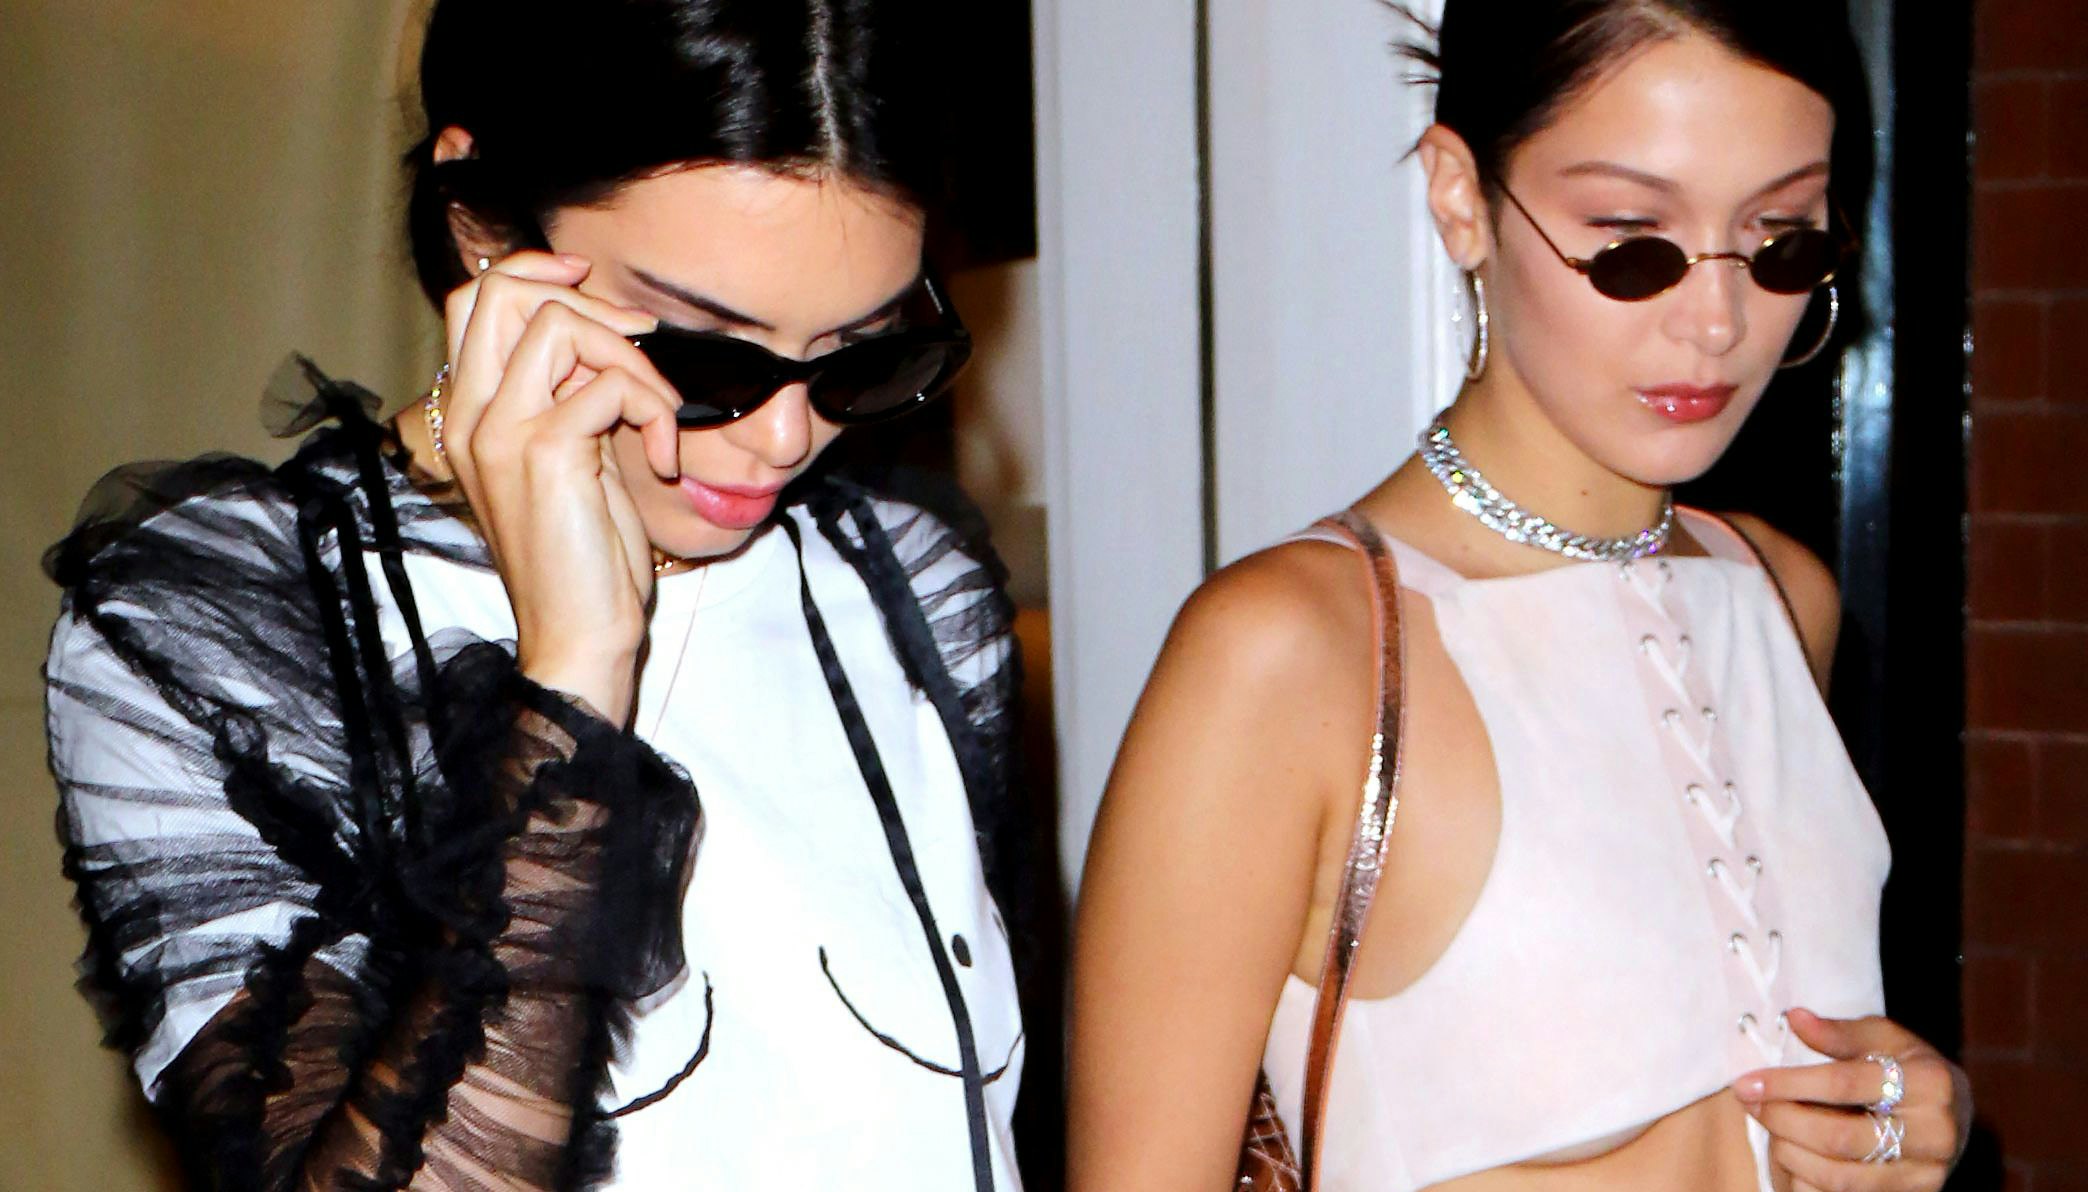 Stars like Bella Hadid and Kendall Jenner ditch their trousers to